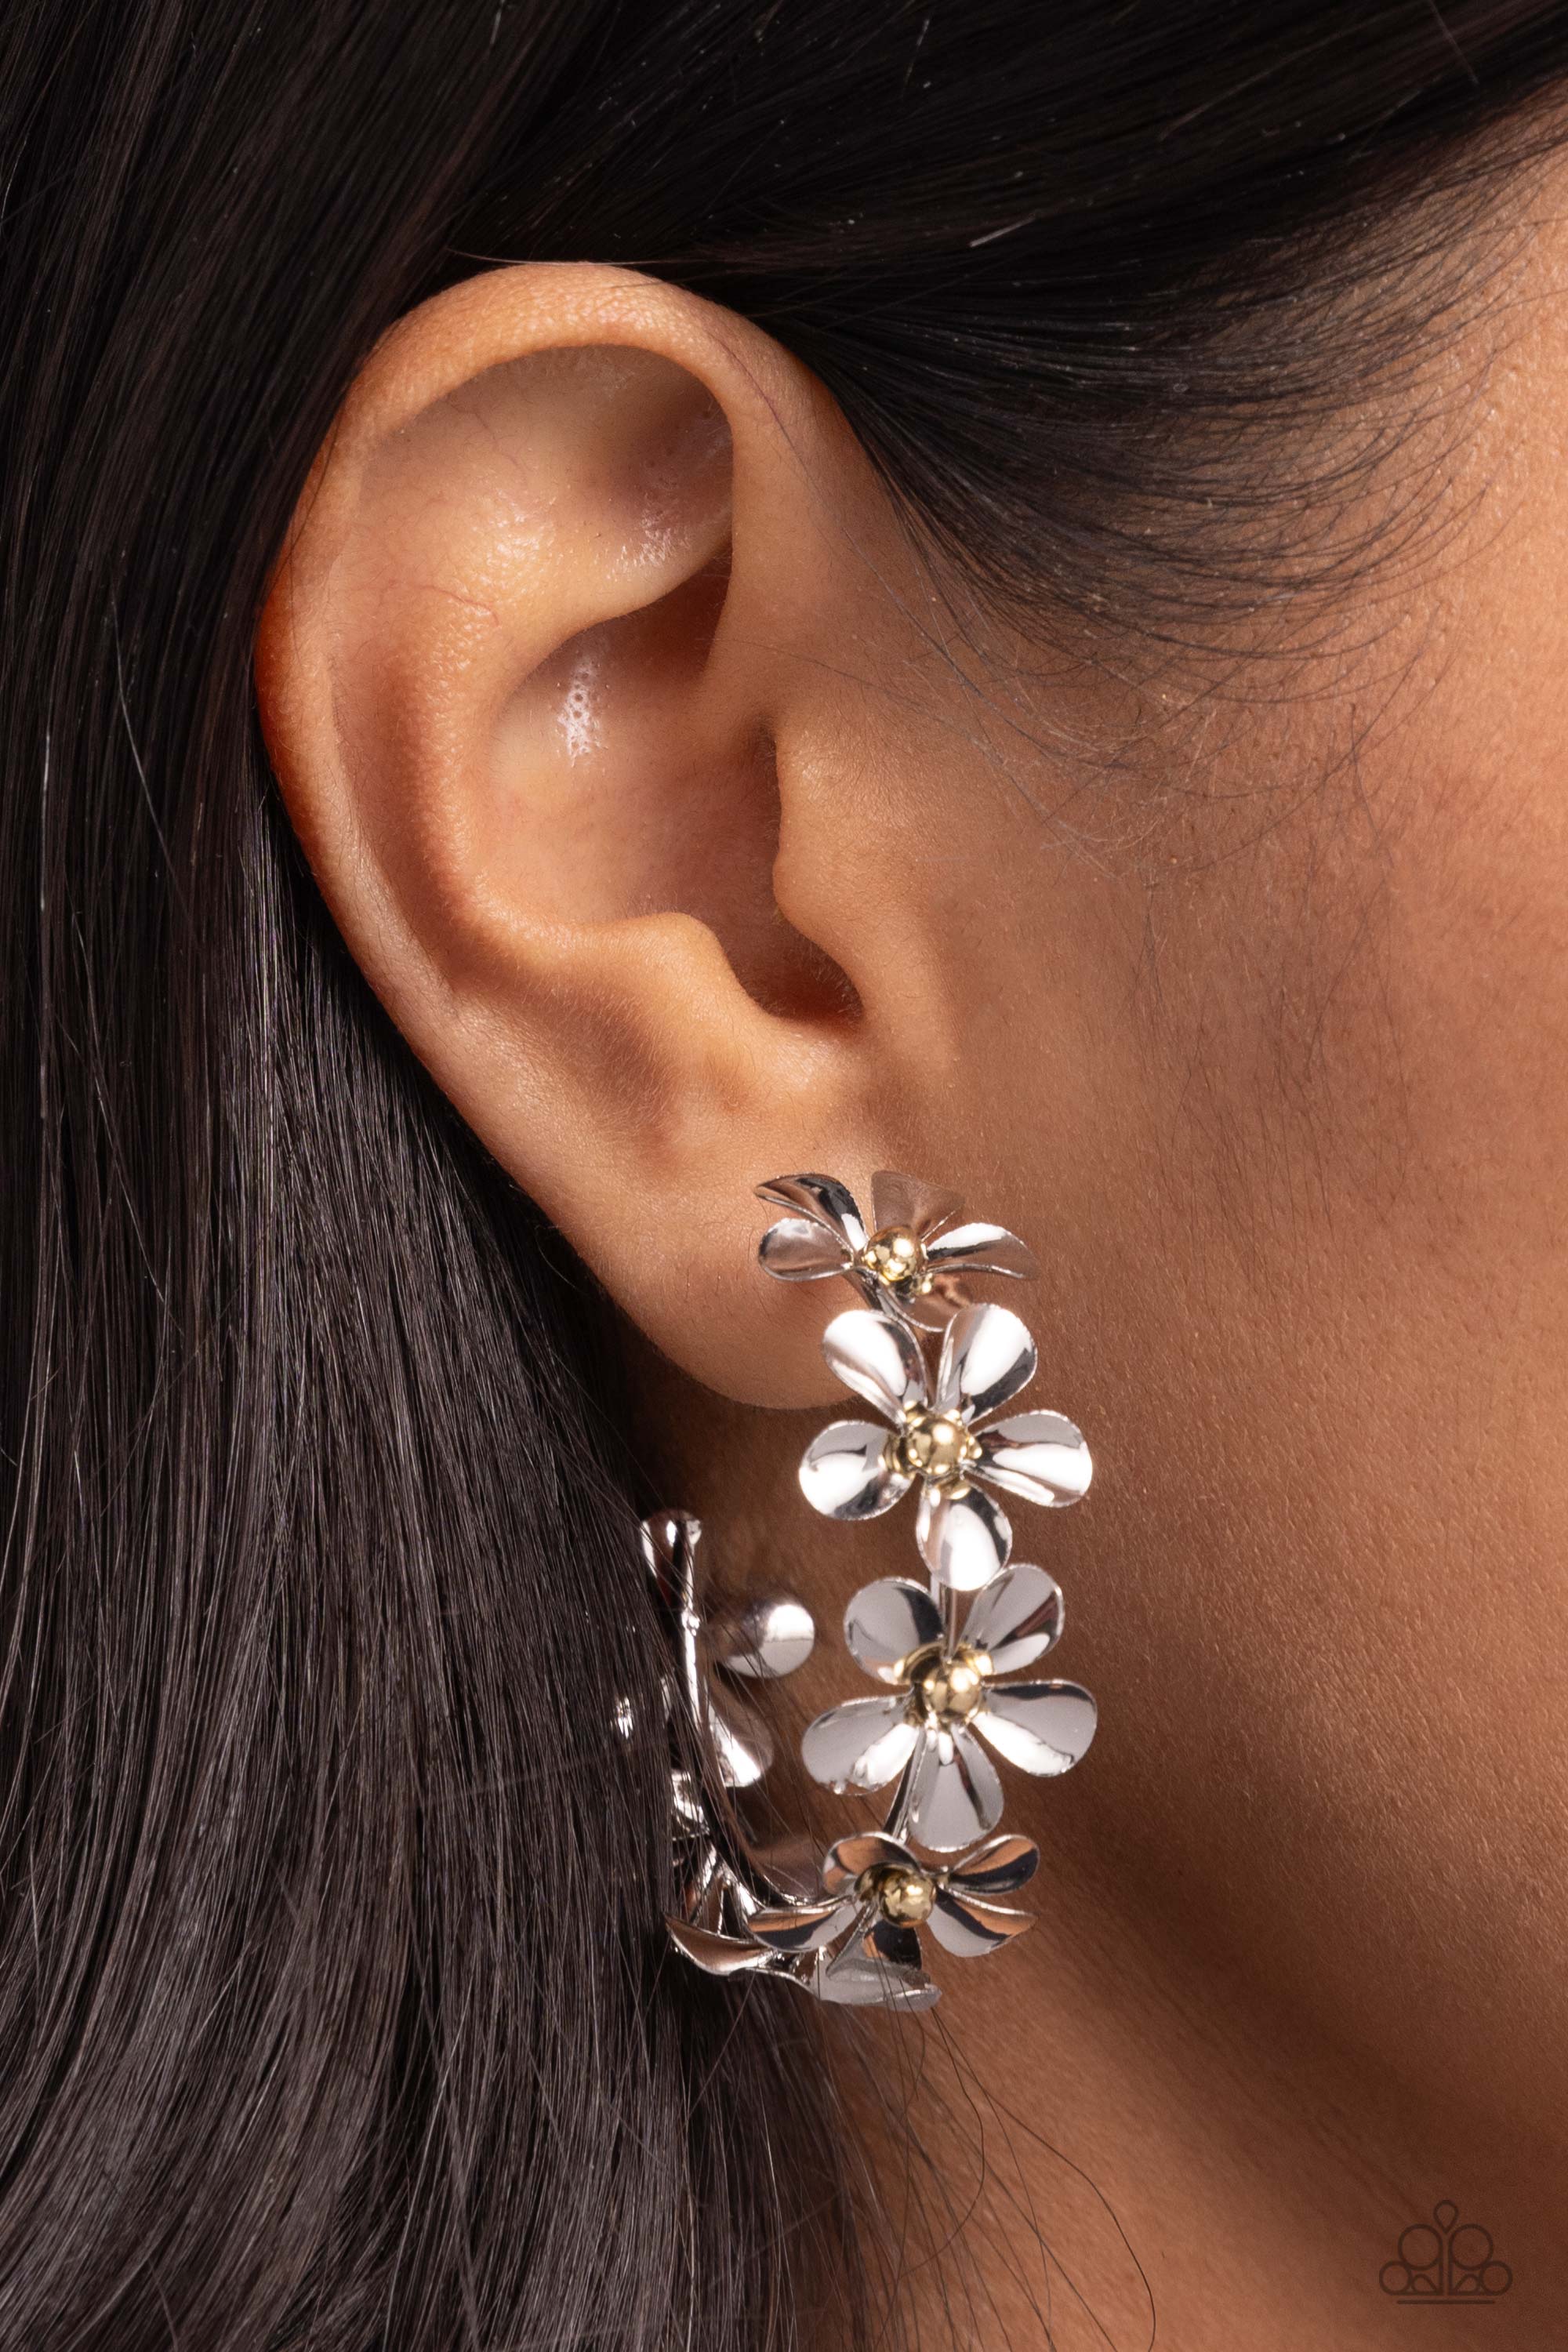 Floral Flamenco Silver Flower Hoop Earrings - Paparazzi Accessories- lightbox - CarasShop.com - $5 Jewelry by Cara Jewels